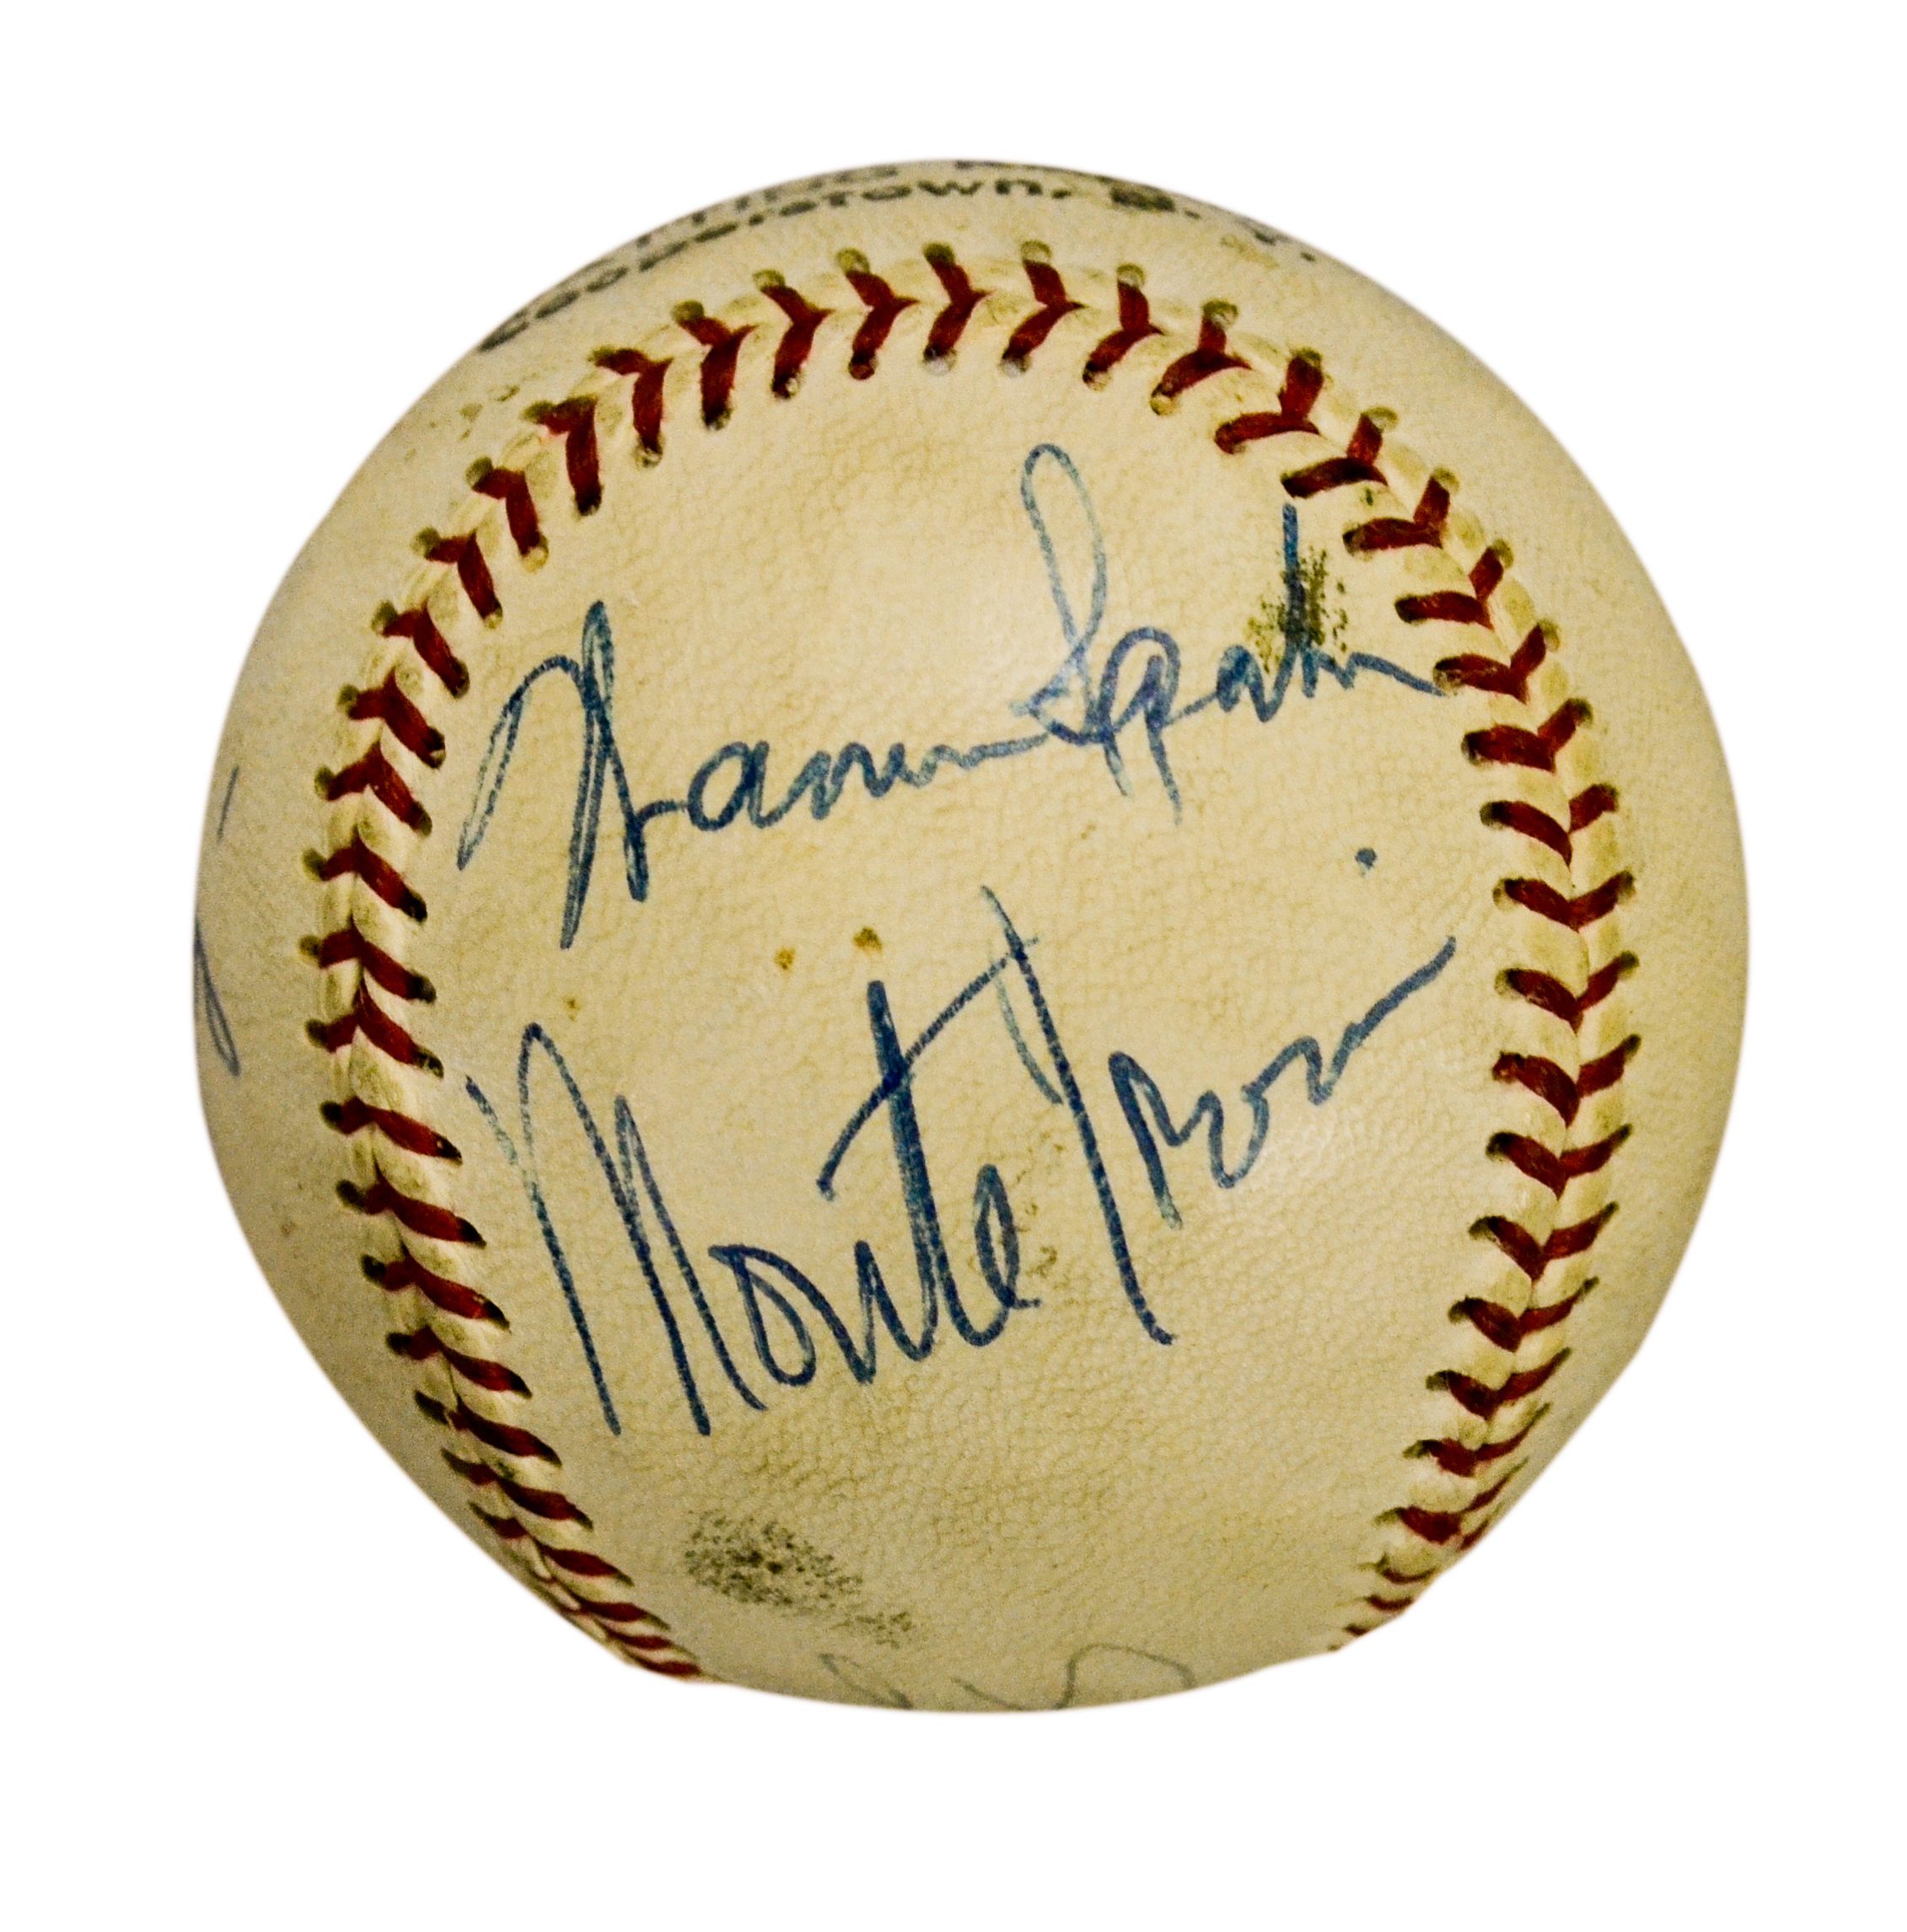 Lot Detail 1973 Signed Hall Of Fame Induction Baseball 7 Hof Signatures Including Musial